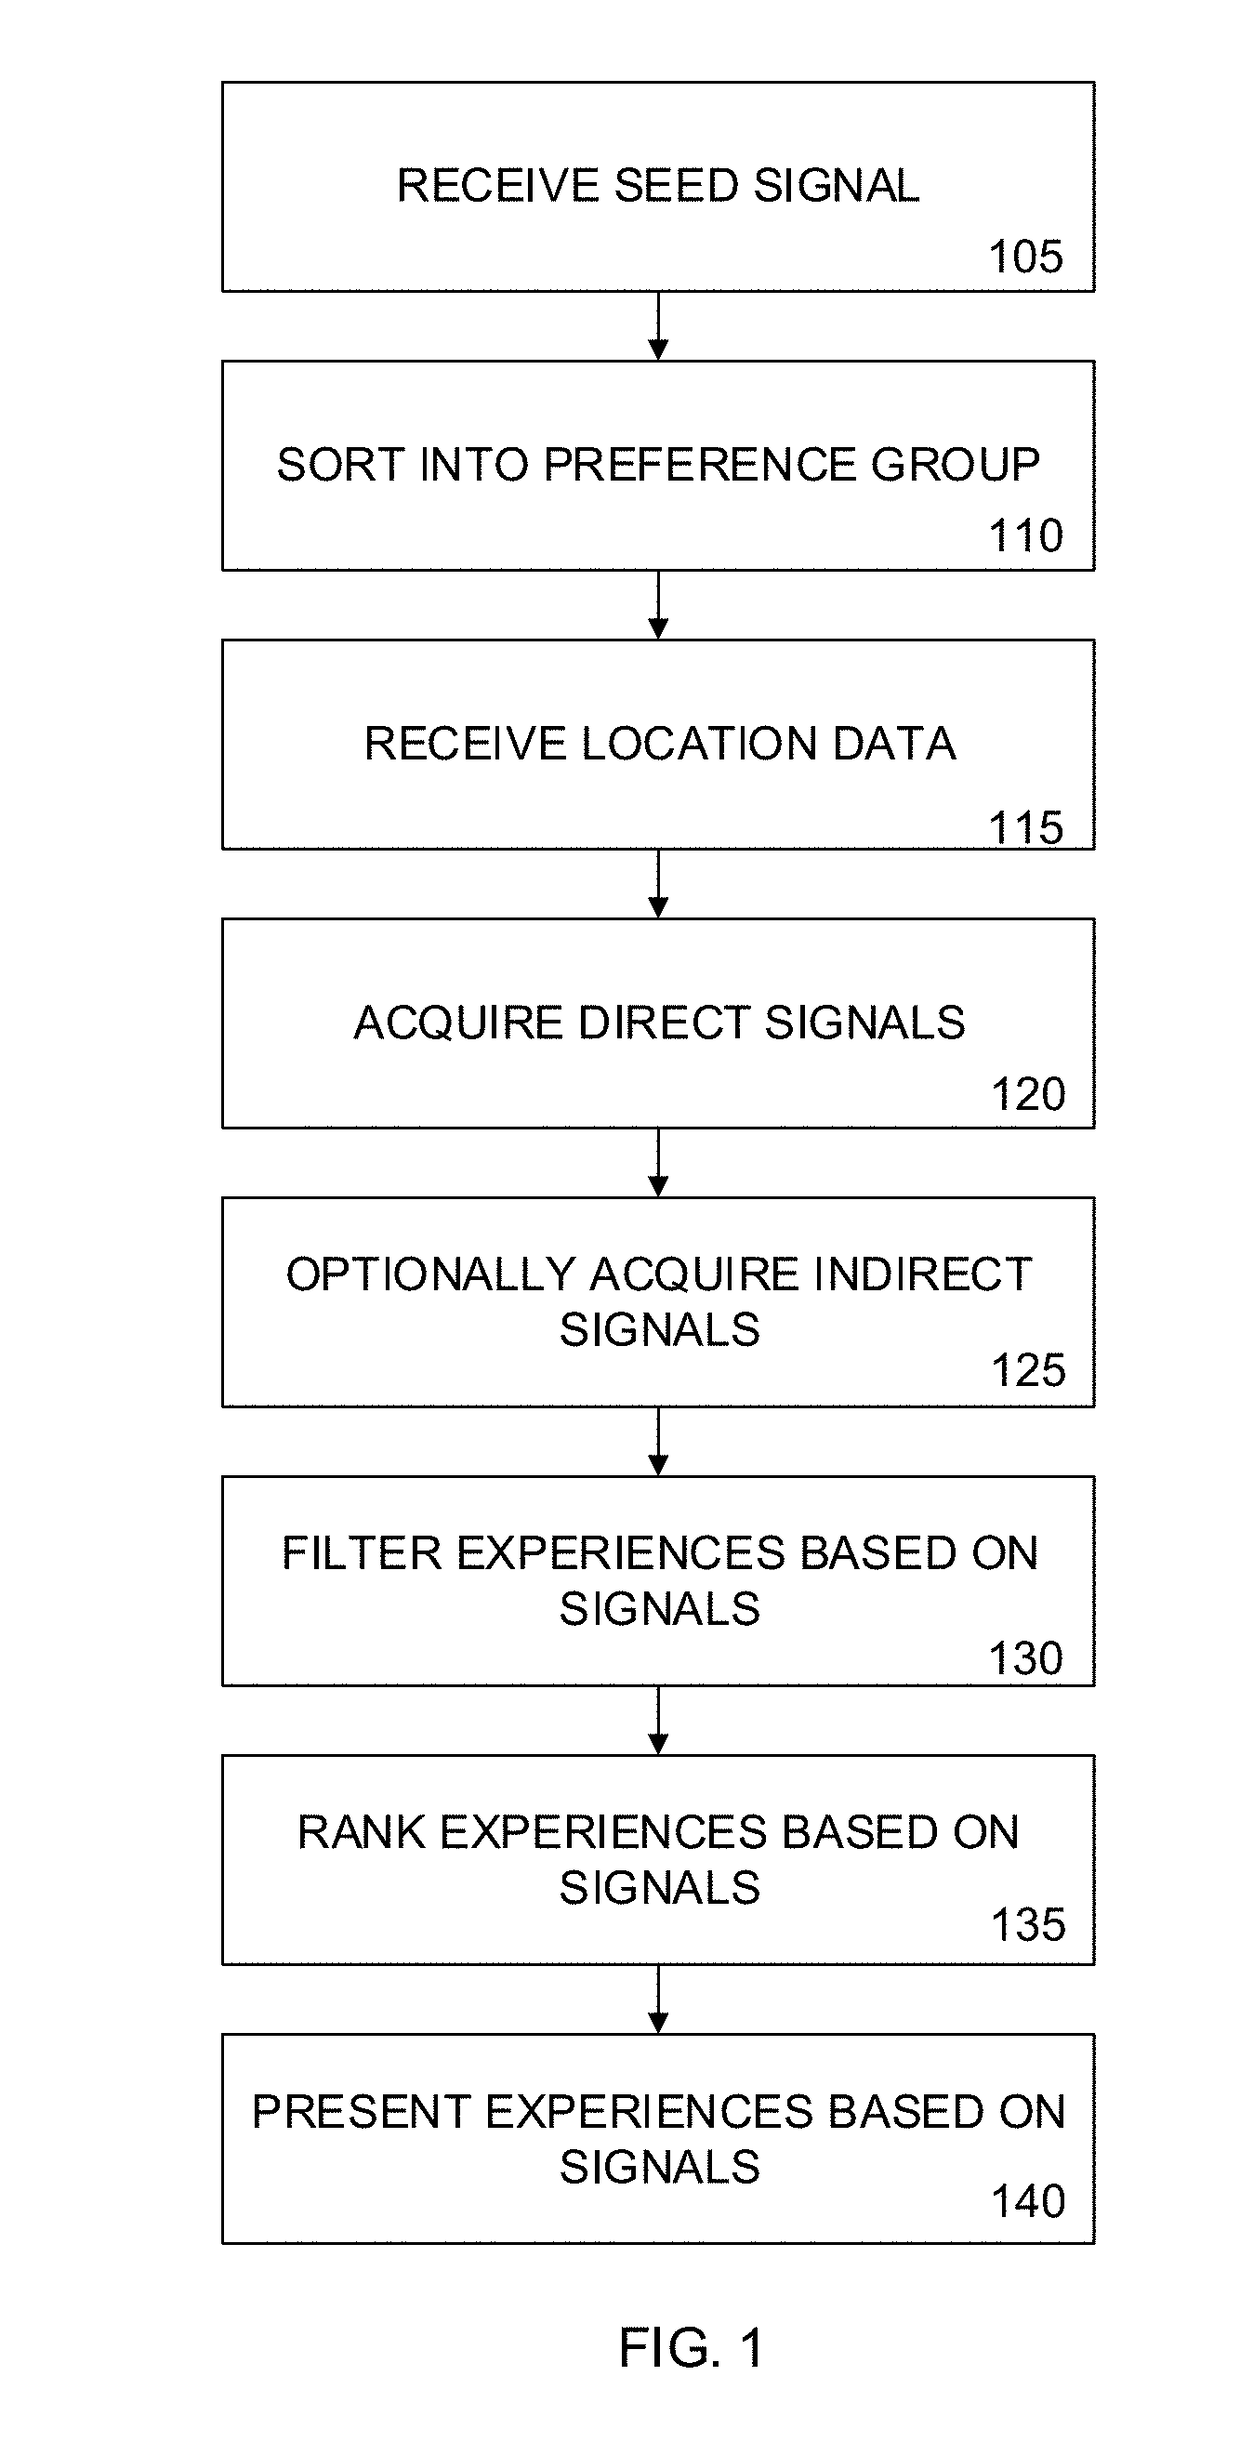 Attraction and Event Guide System and Related Methods